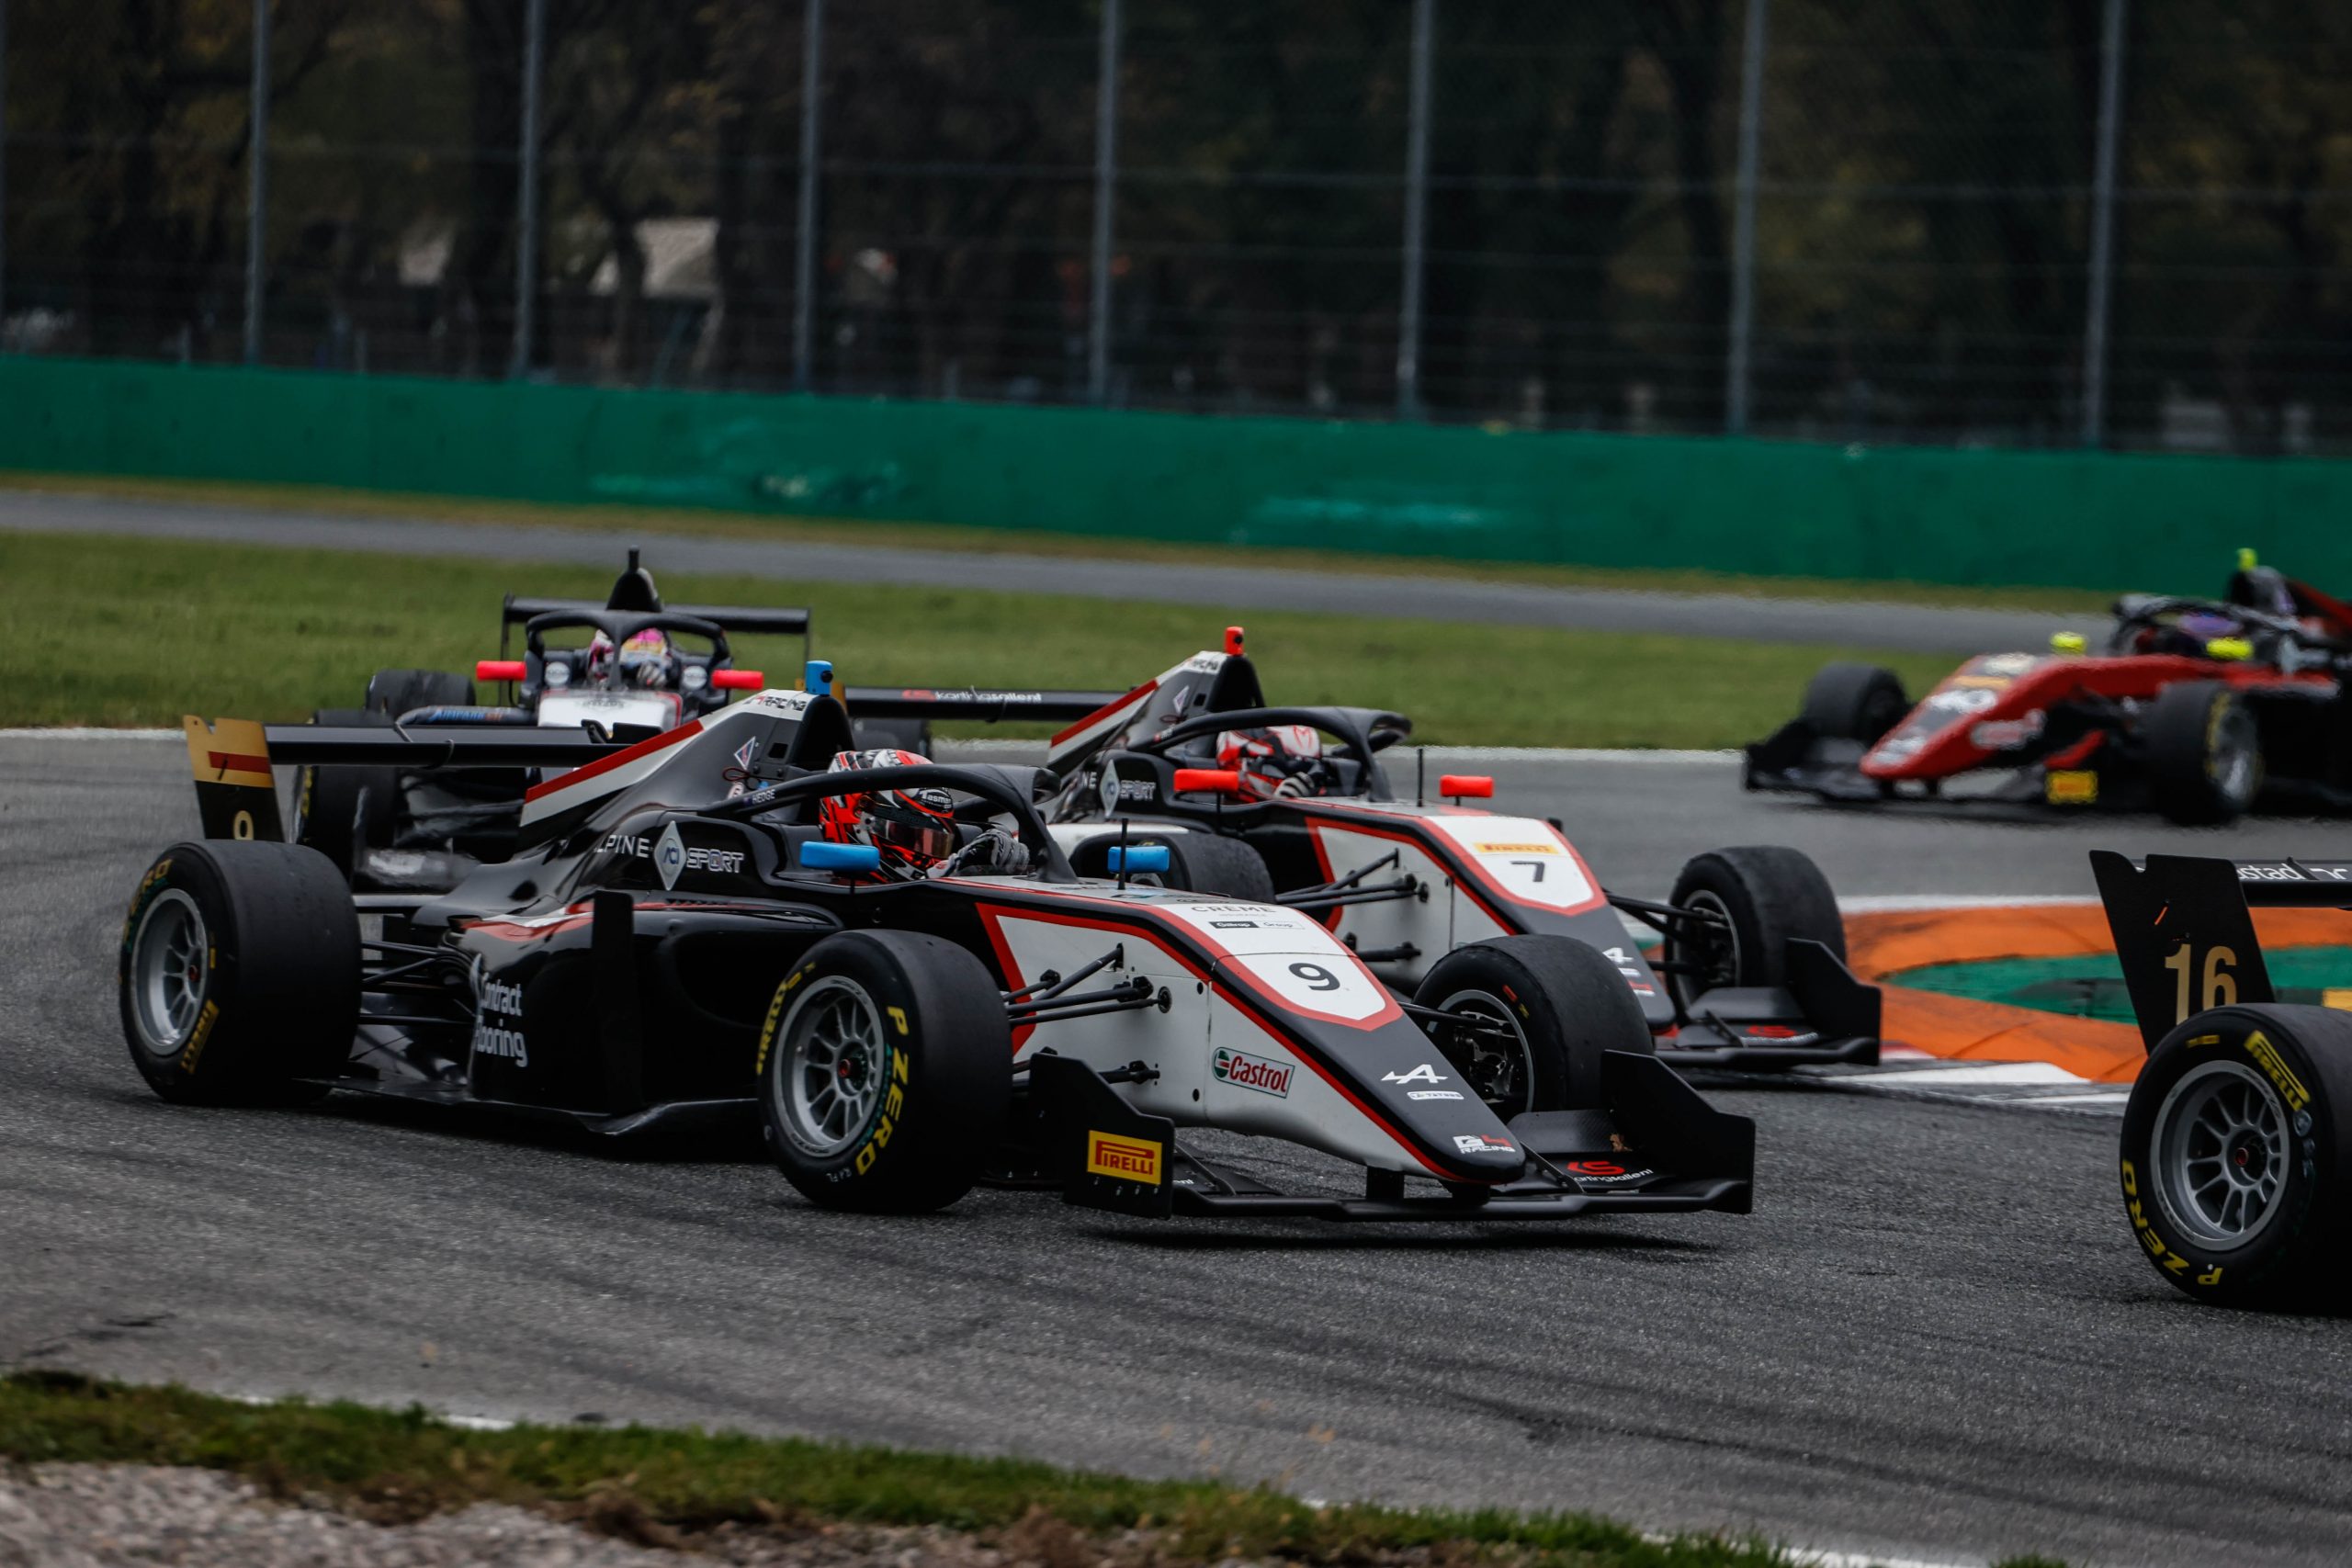 G4 Racing scores more points at Monza